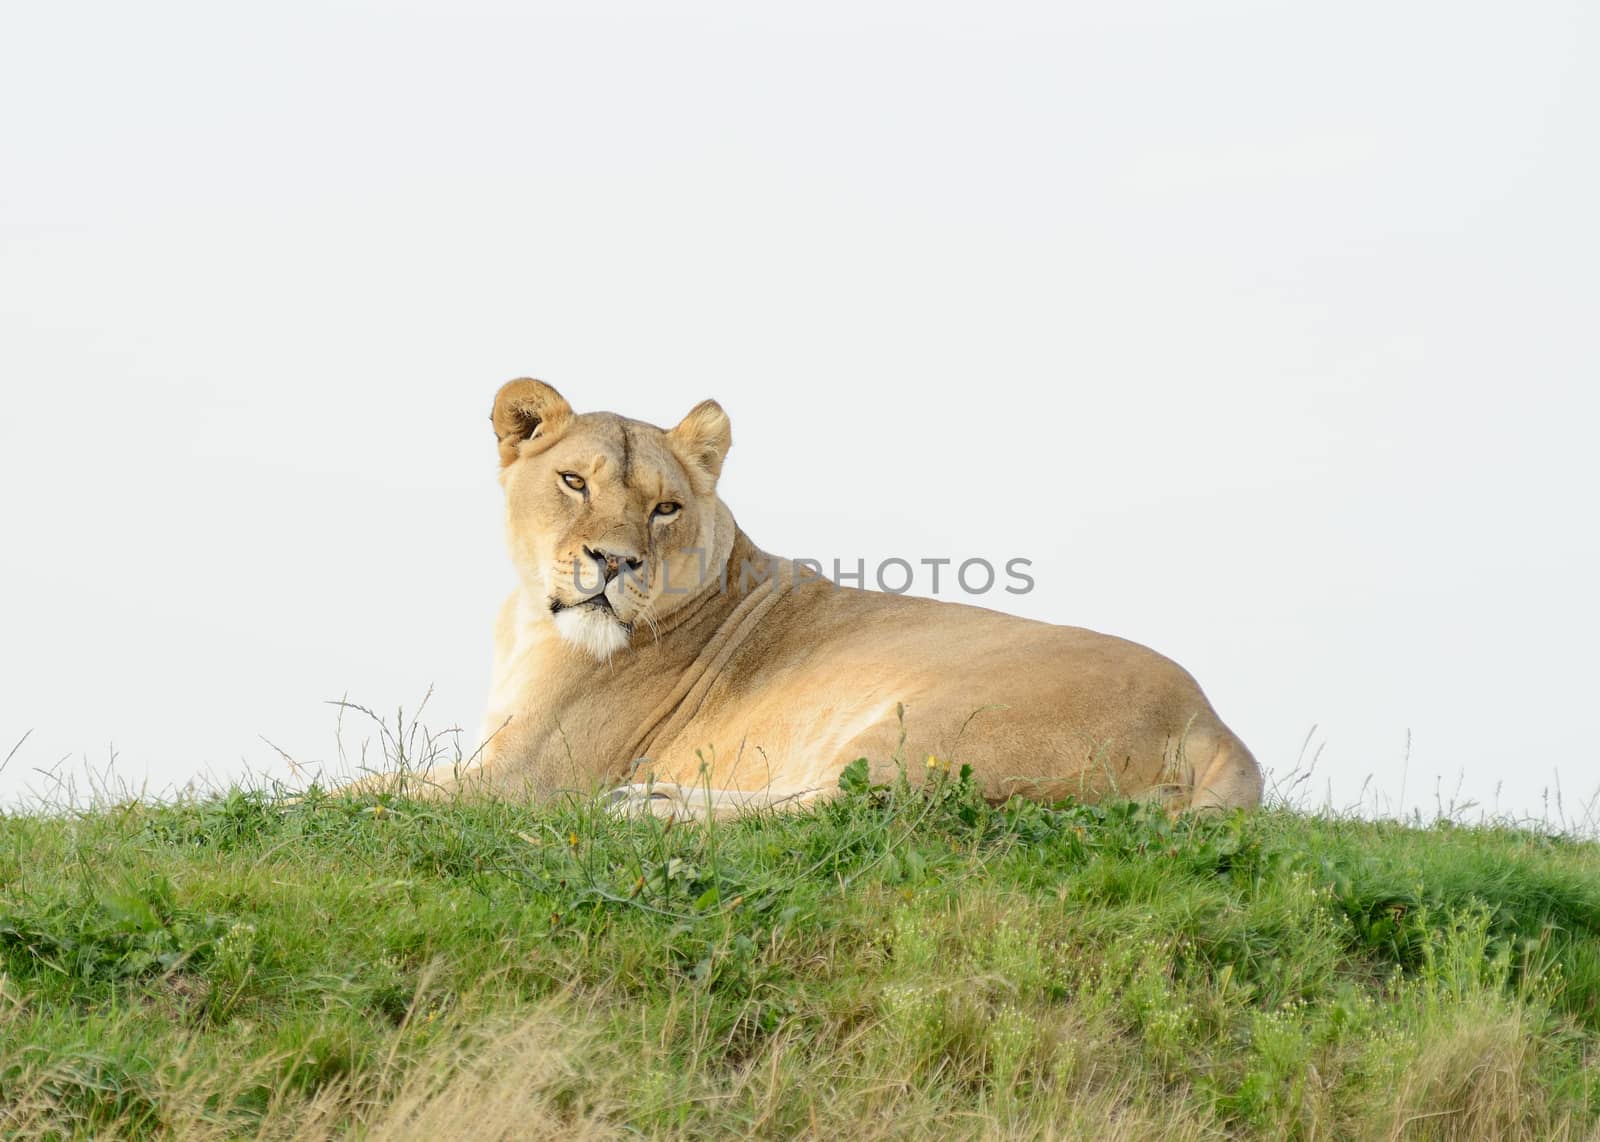 Lioness laying on grass looks alert